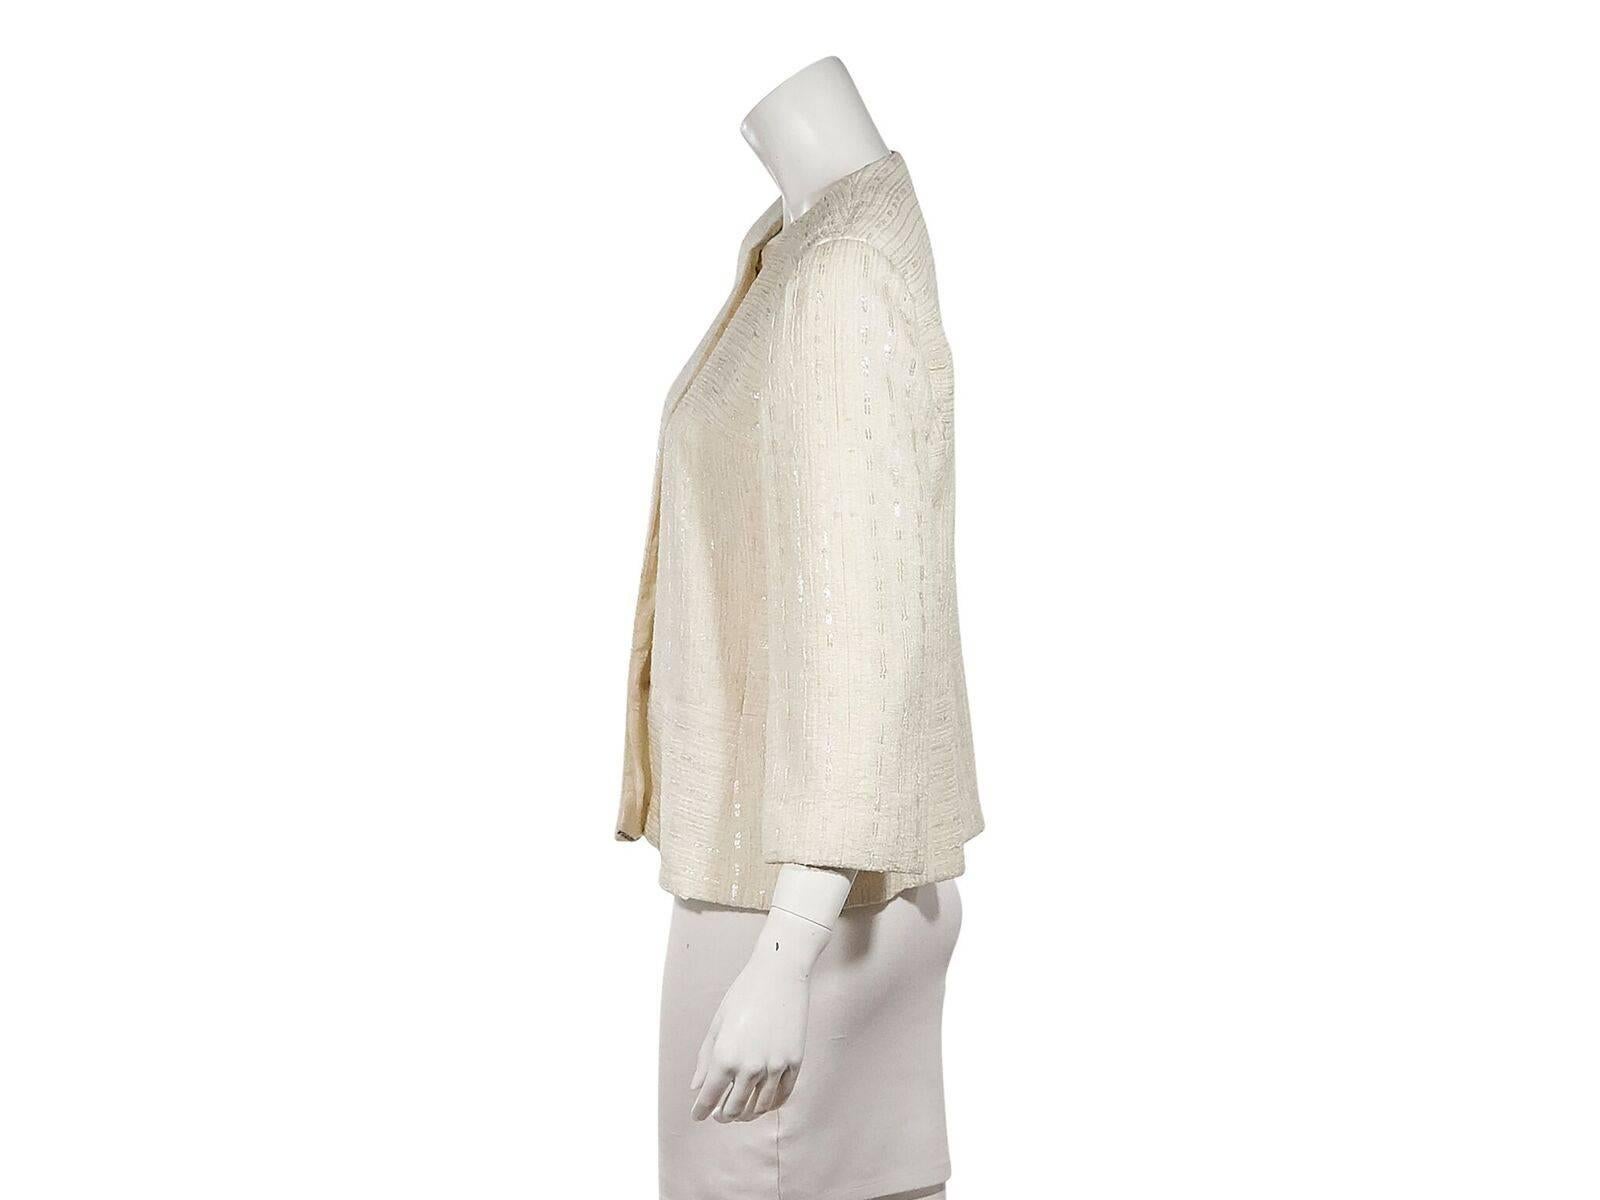 Product details:  Vintage cream jacket by Chanel.  Crewneck.  Three-quarter length sleeves.  Button-front closure.  40